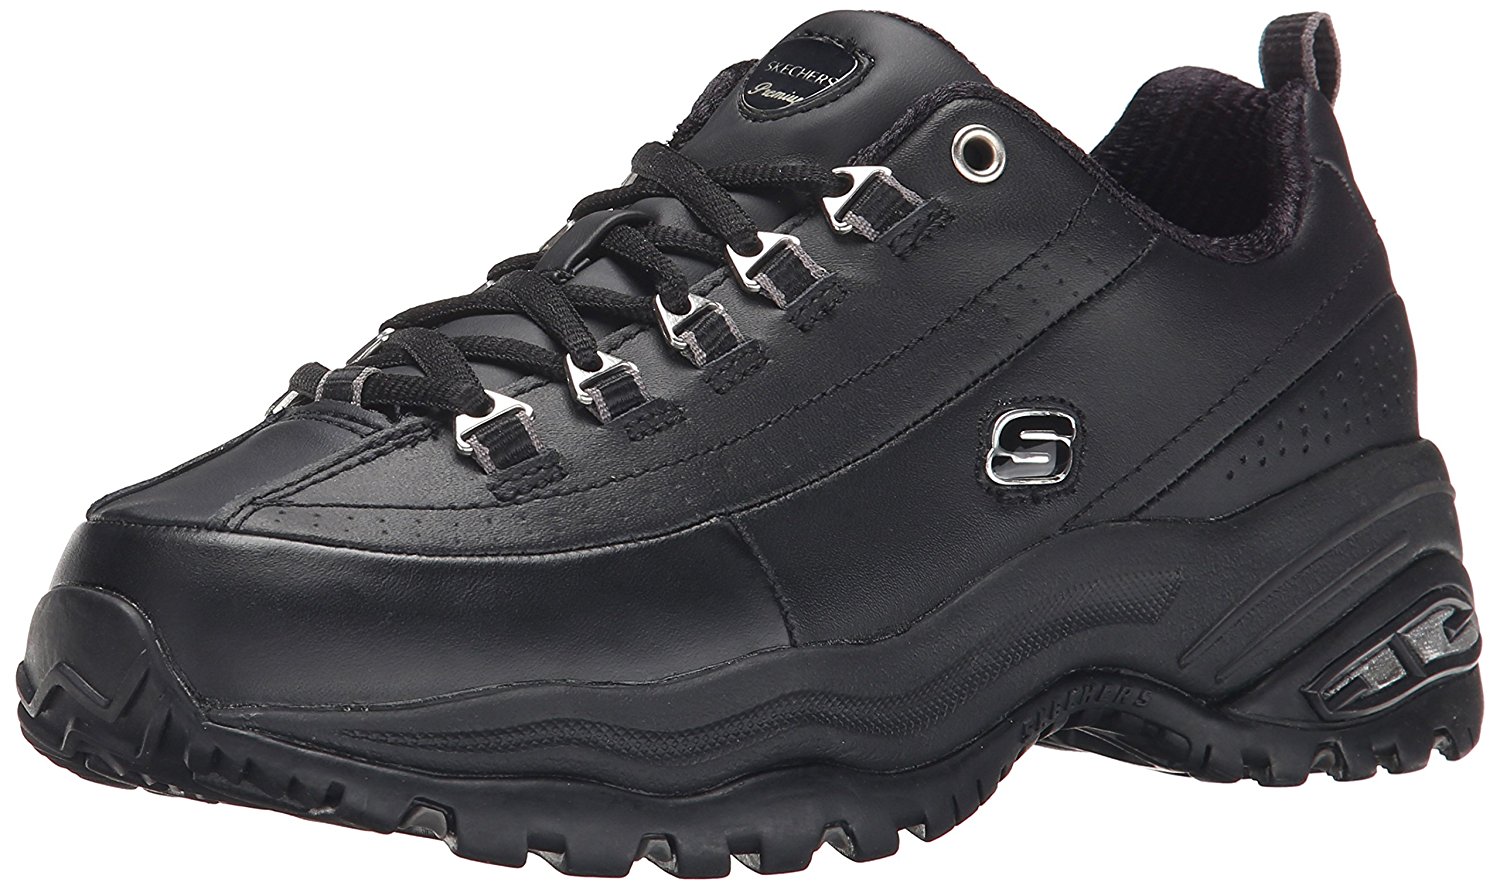 Skechers Womens 1728wnv Low Top Lace Up Walking Shoes, Black, Size 8.0 ...